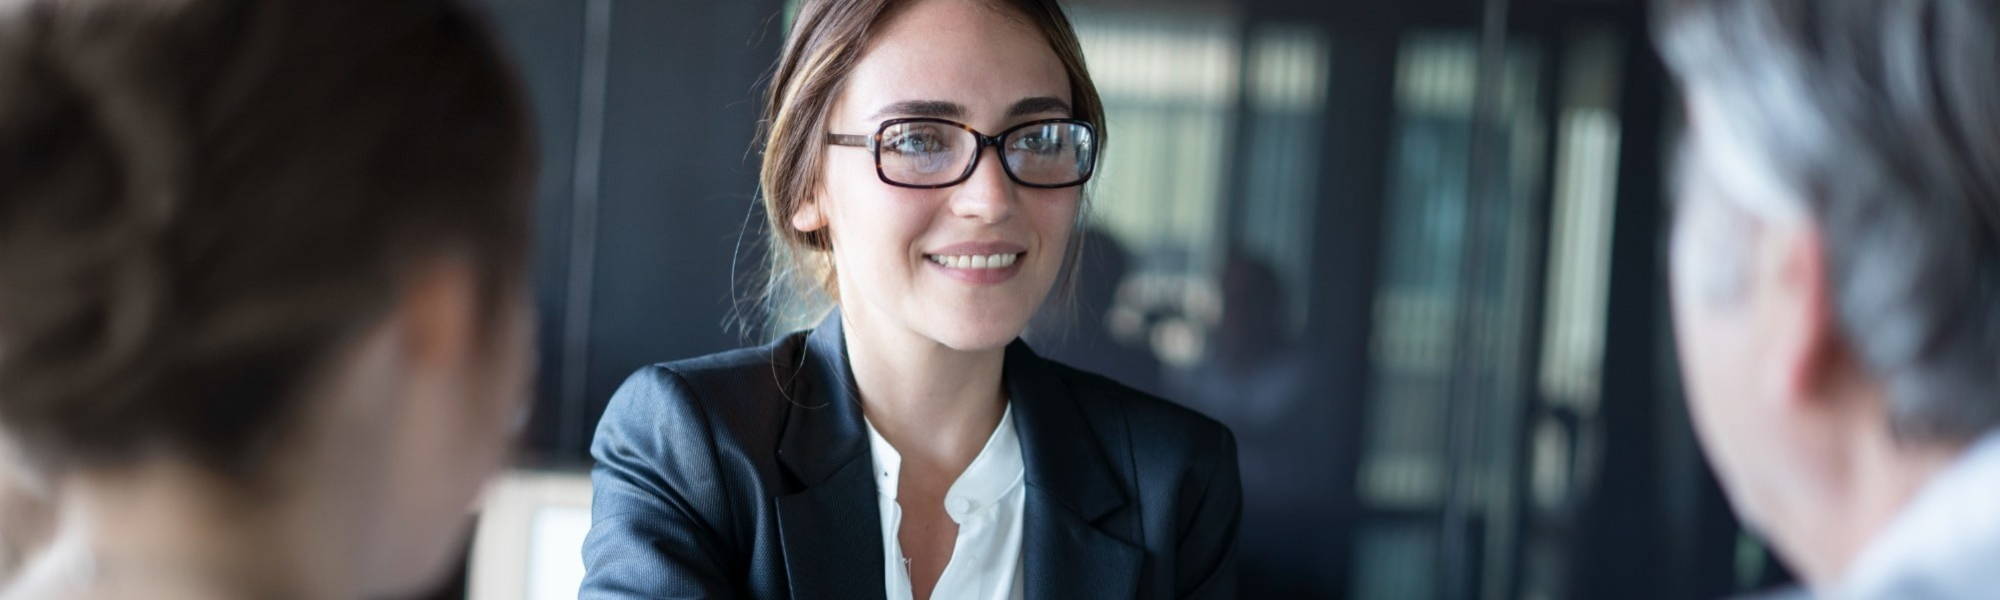 Young female in business suit having interview meeting with prospective employer